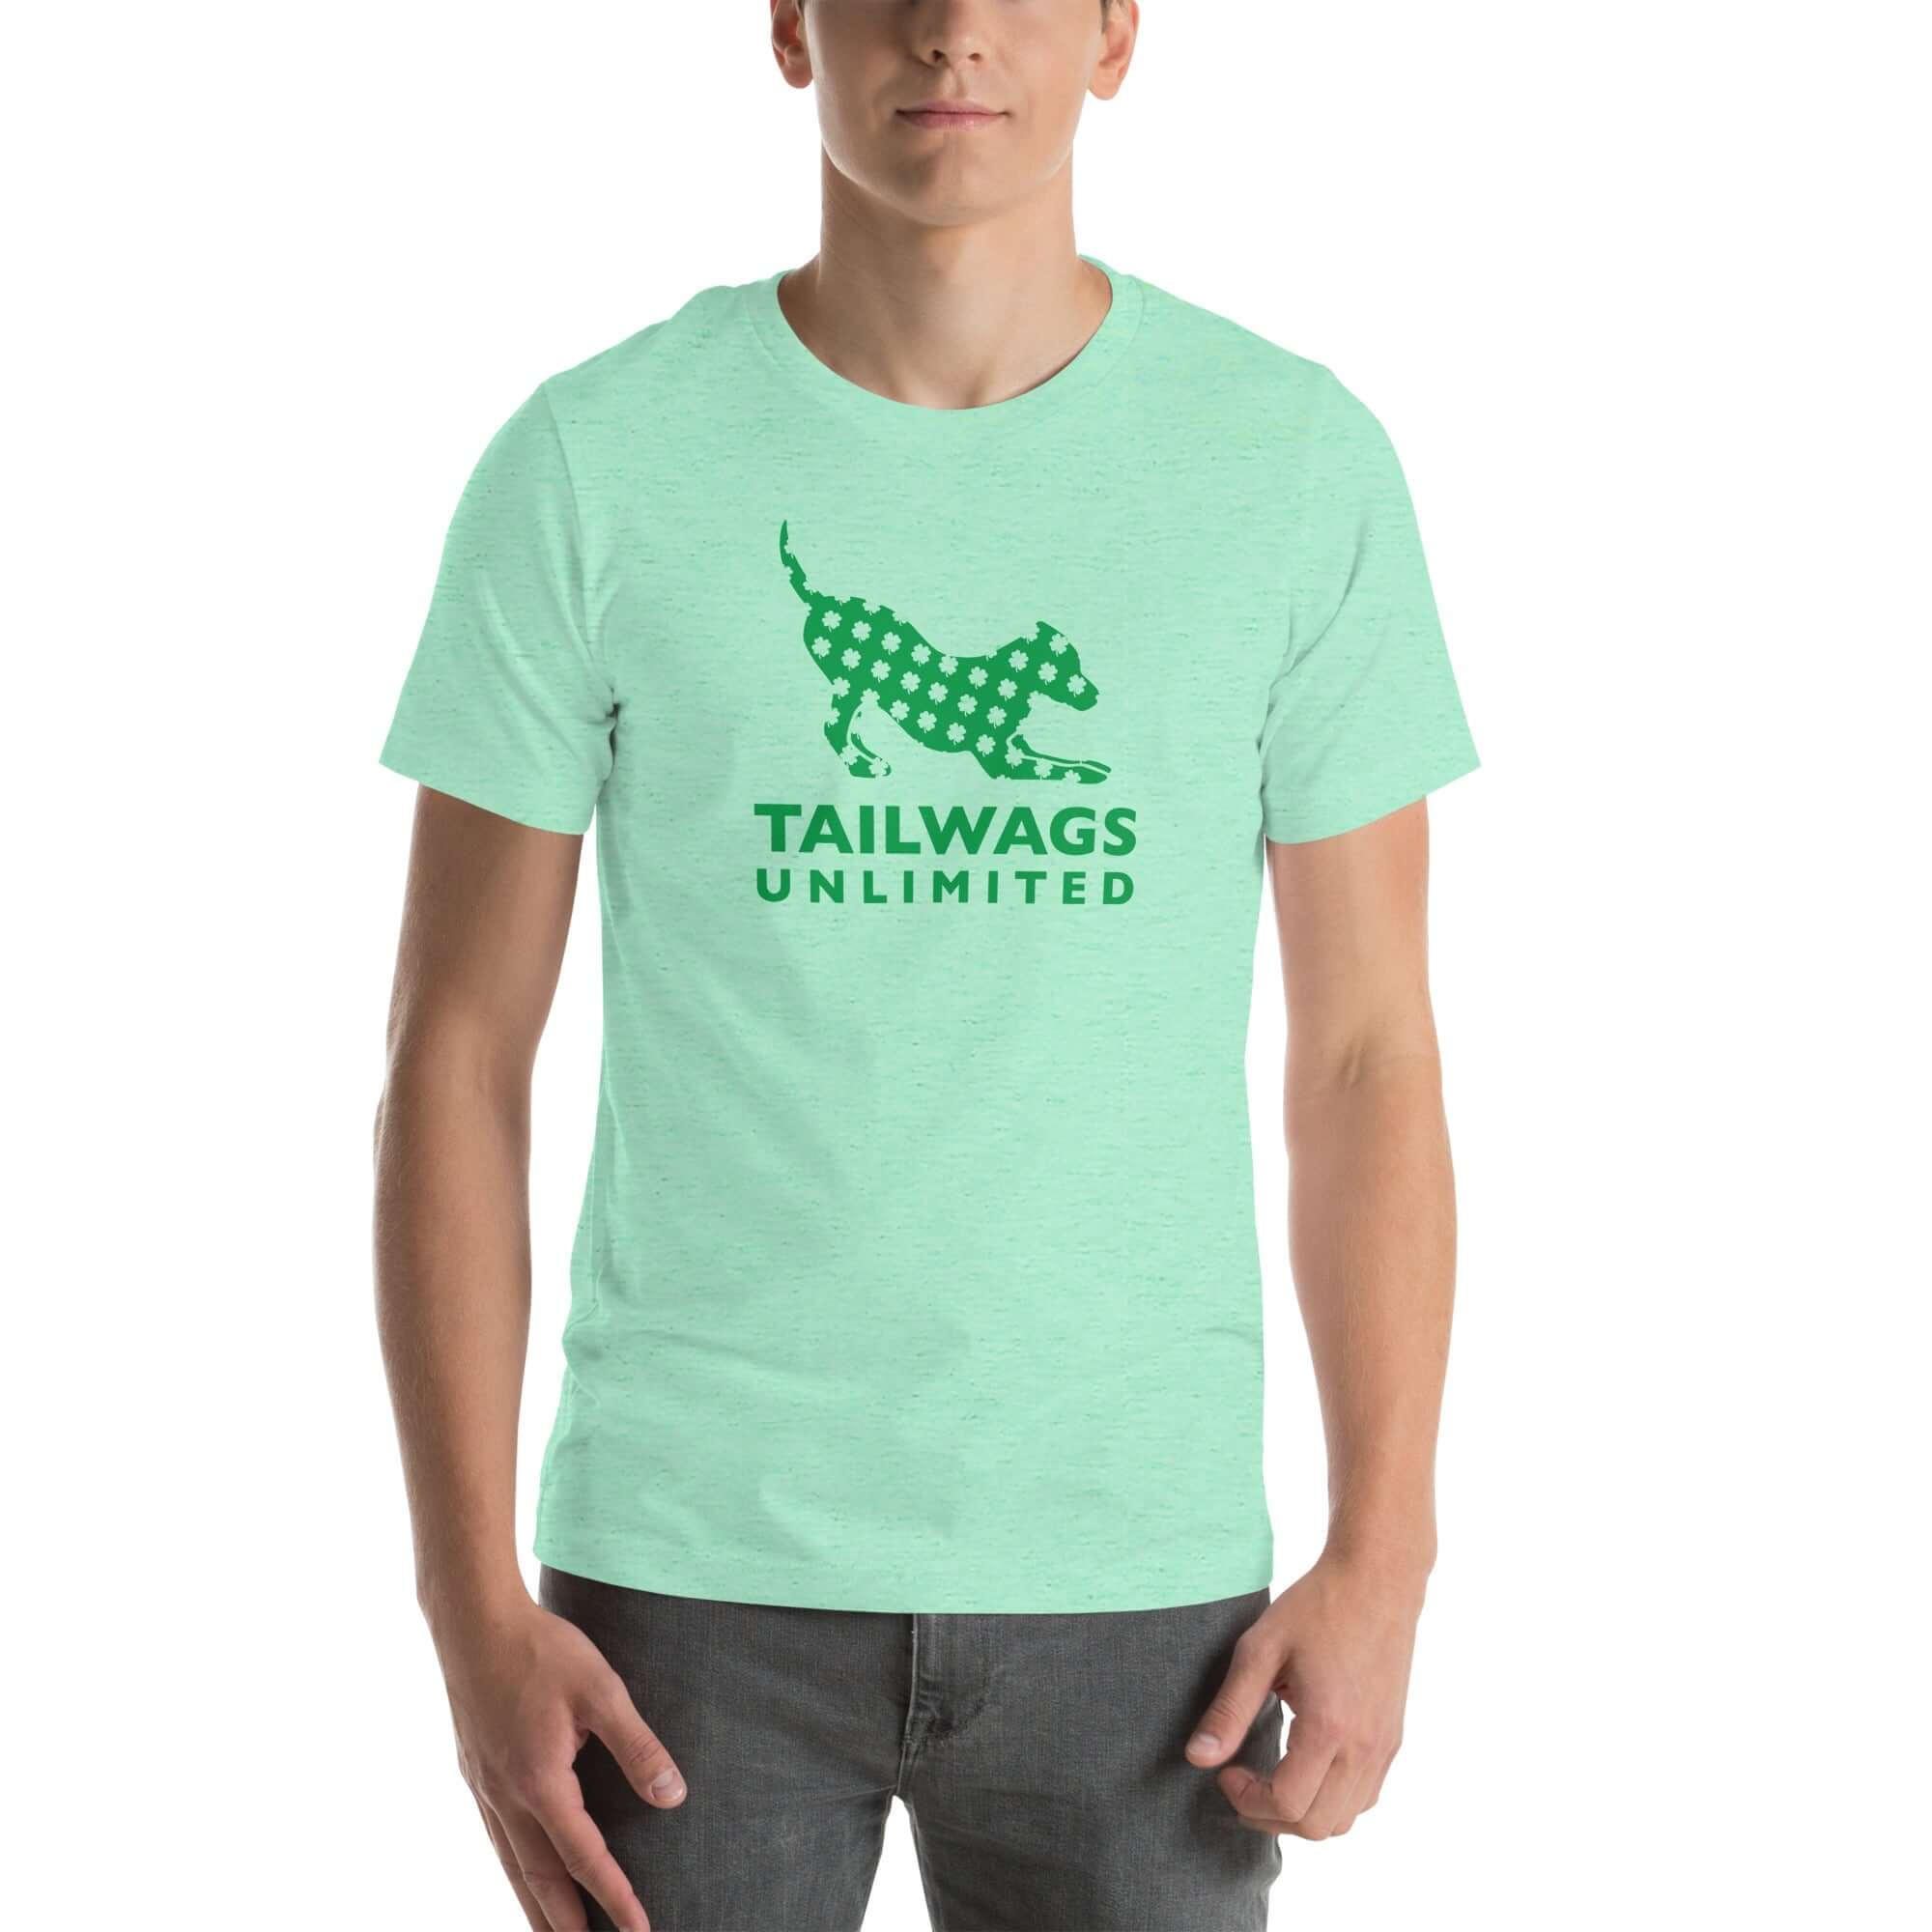 Clover Patterned Green Logo T-Shirt - TAILWAGS UNLIMITED